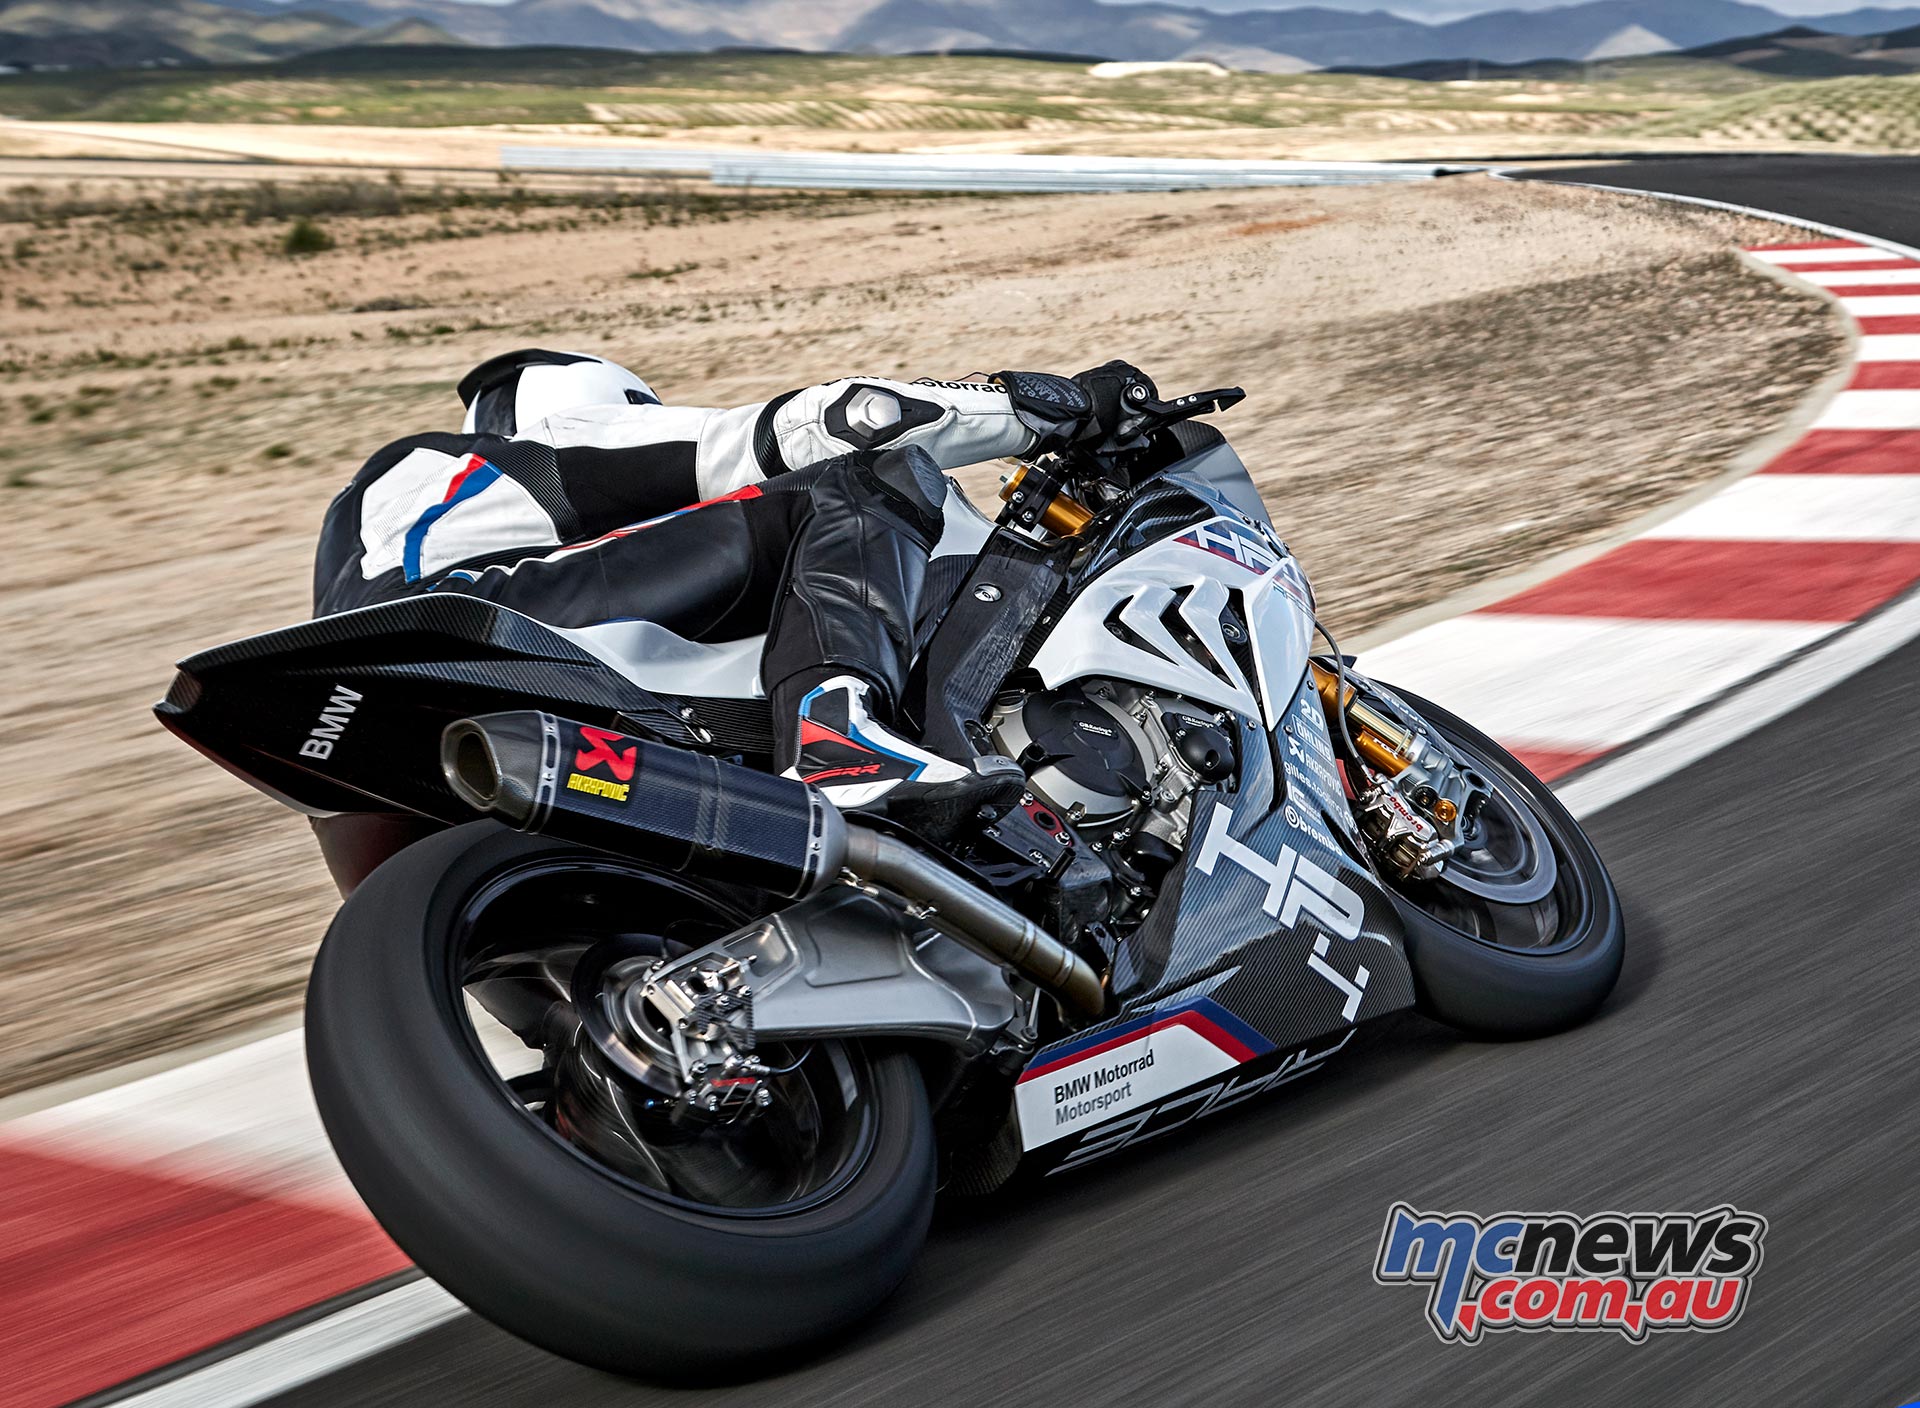 BMW S 1000 RR next level, Introducing HP4 Race